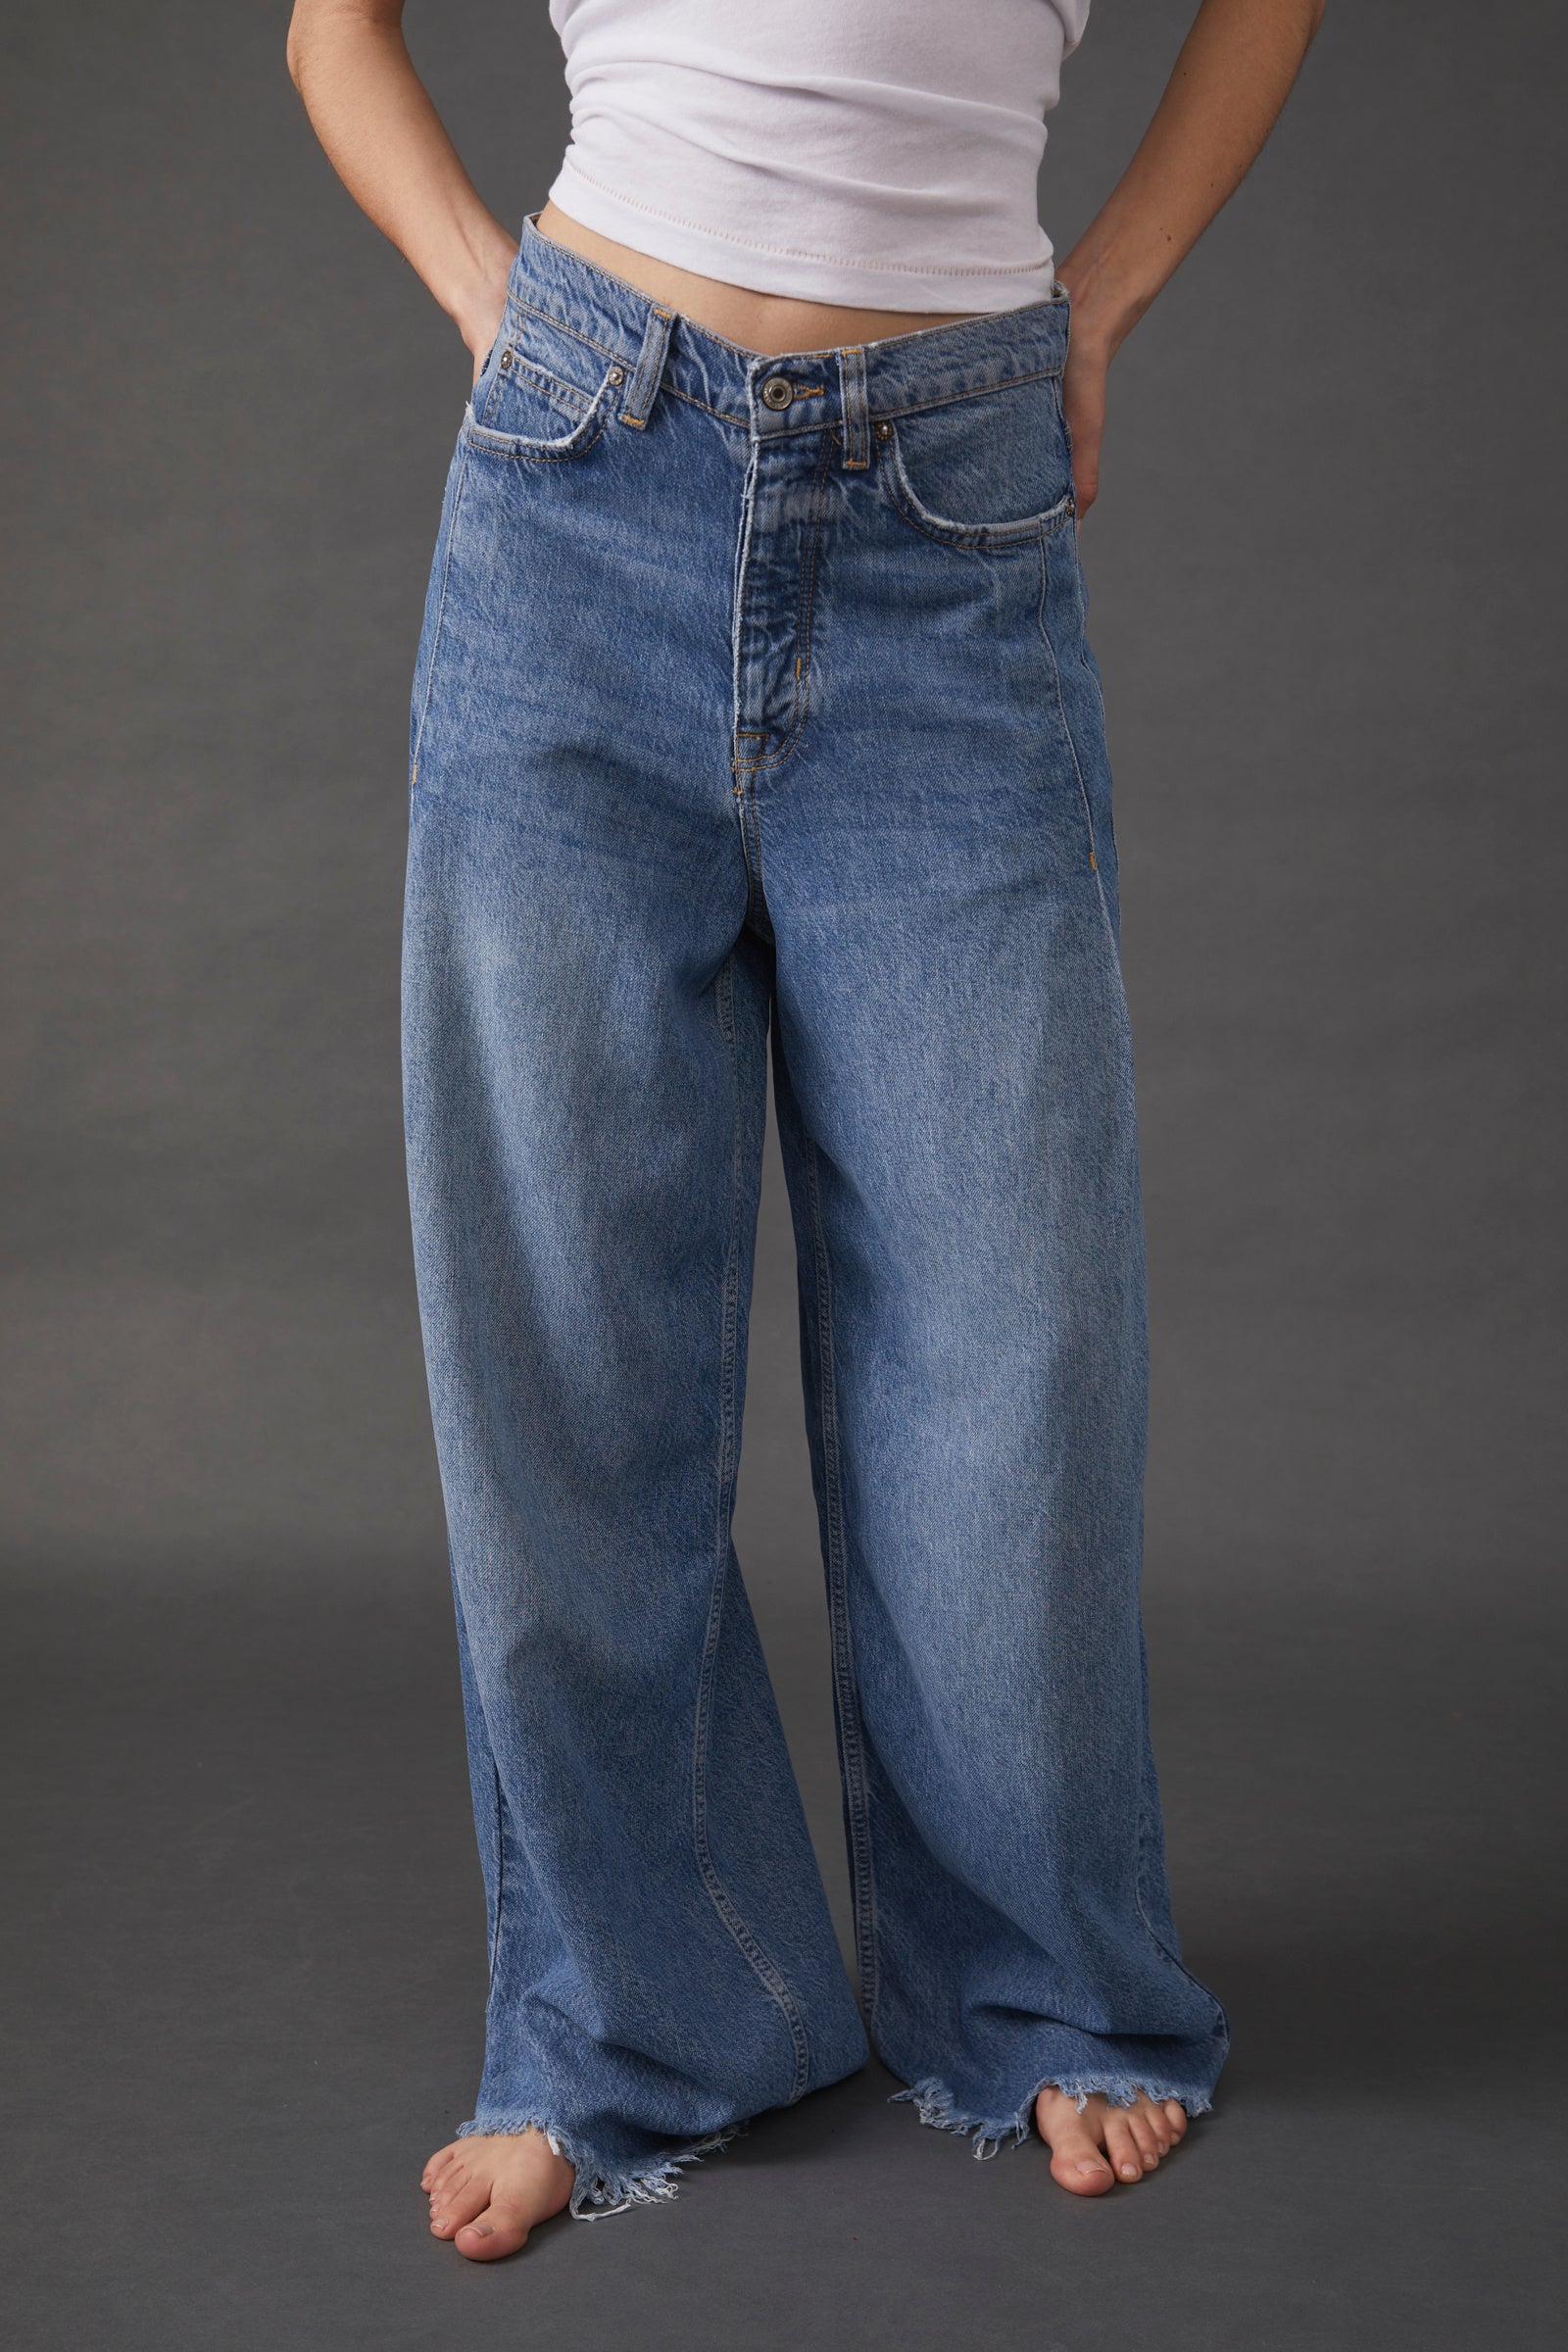 Old West Slouchy Jeans